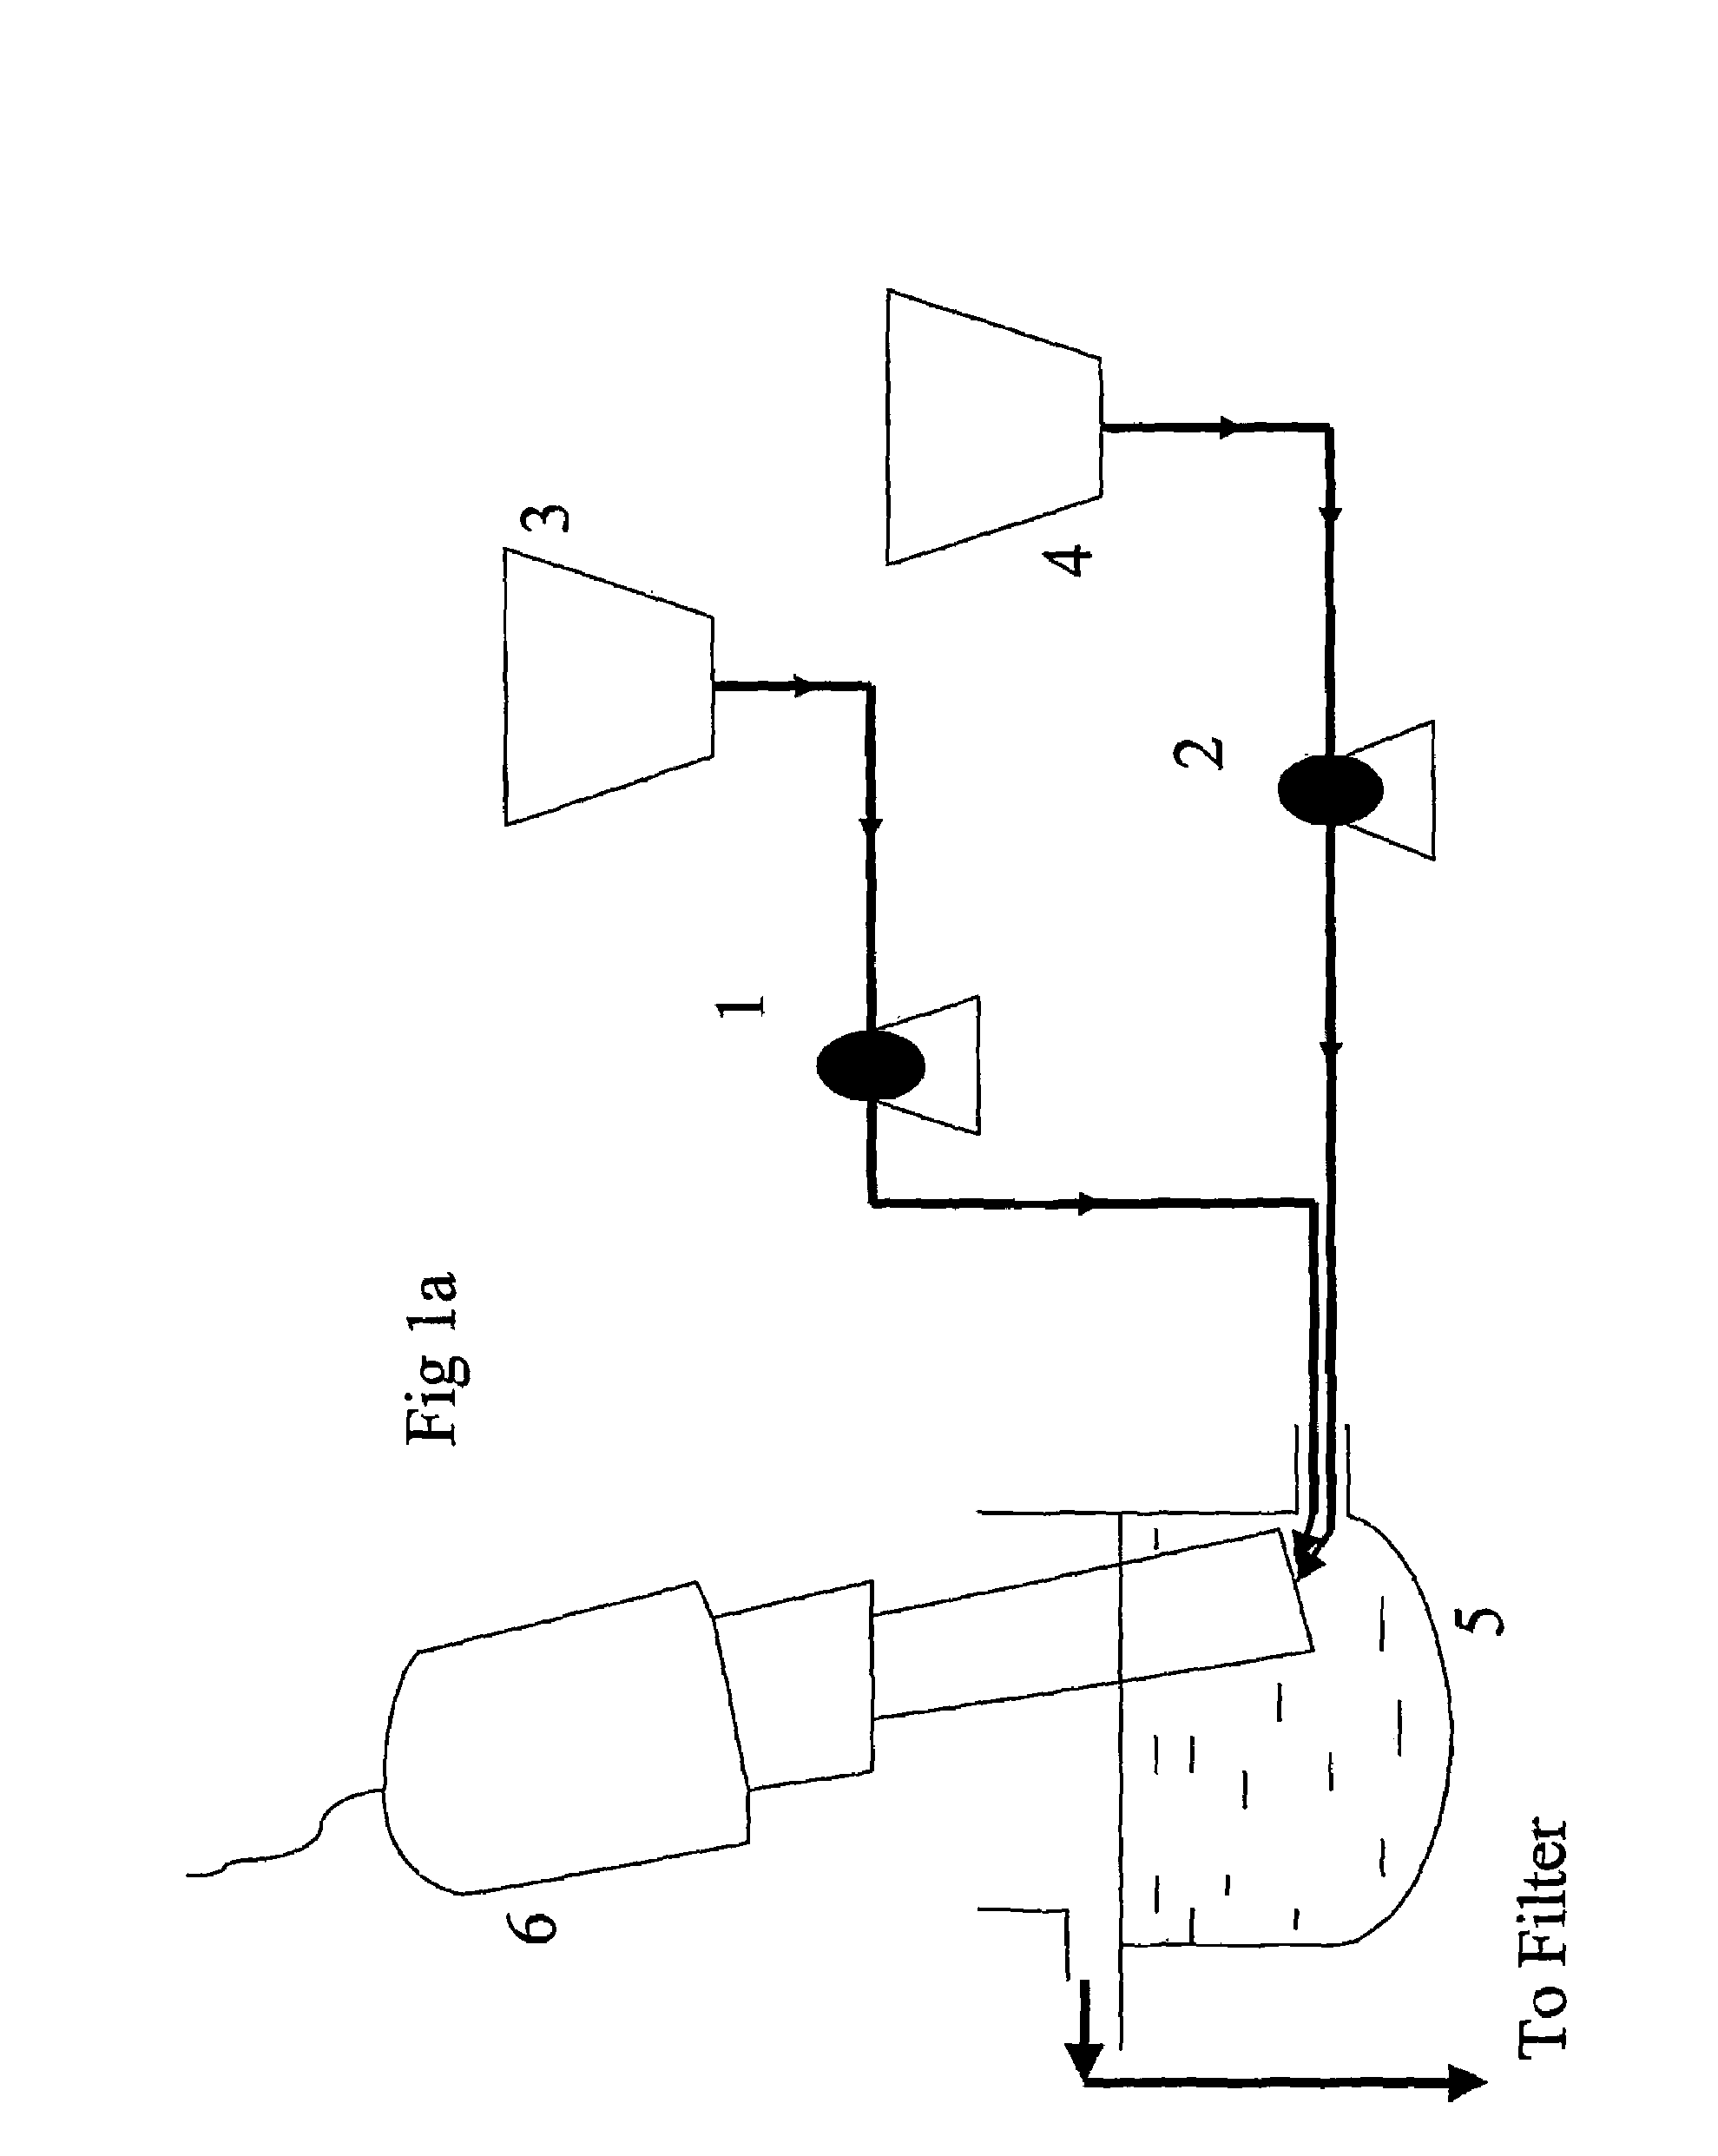 Apparatus and process for preparing crystalline particles